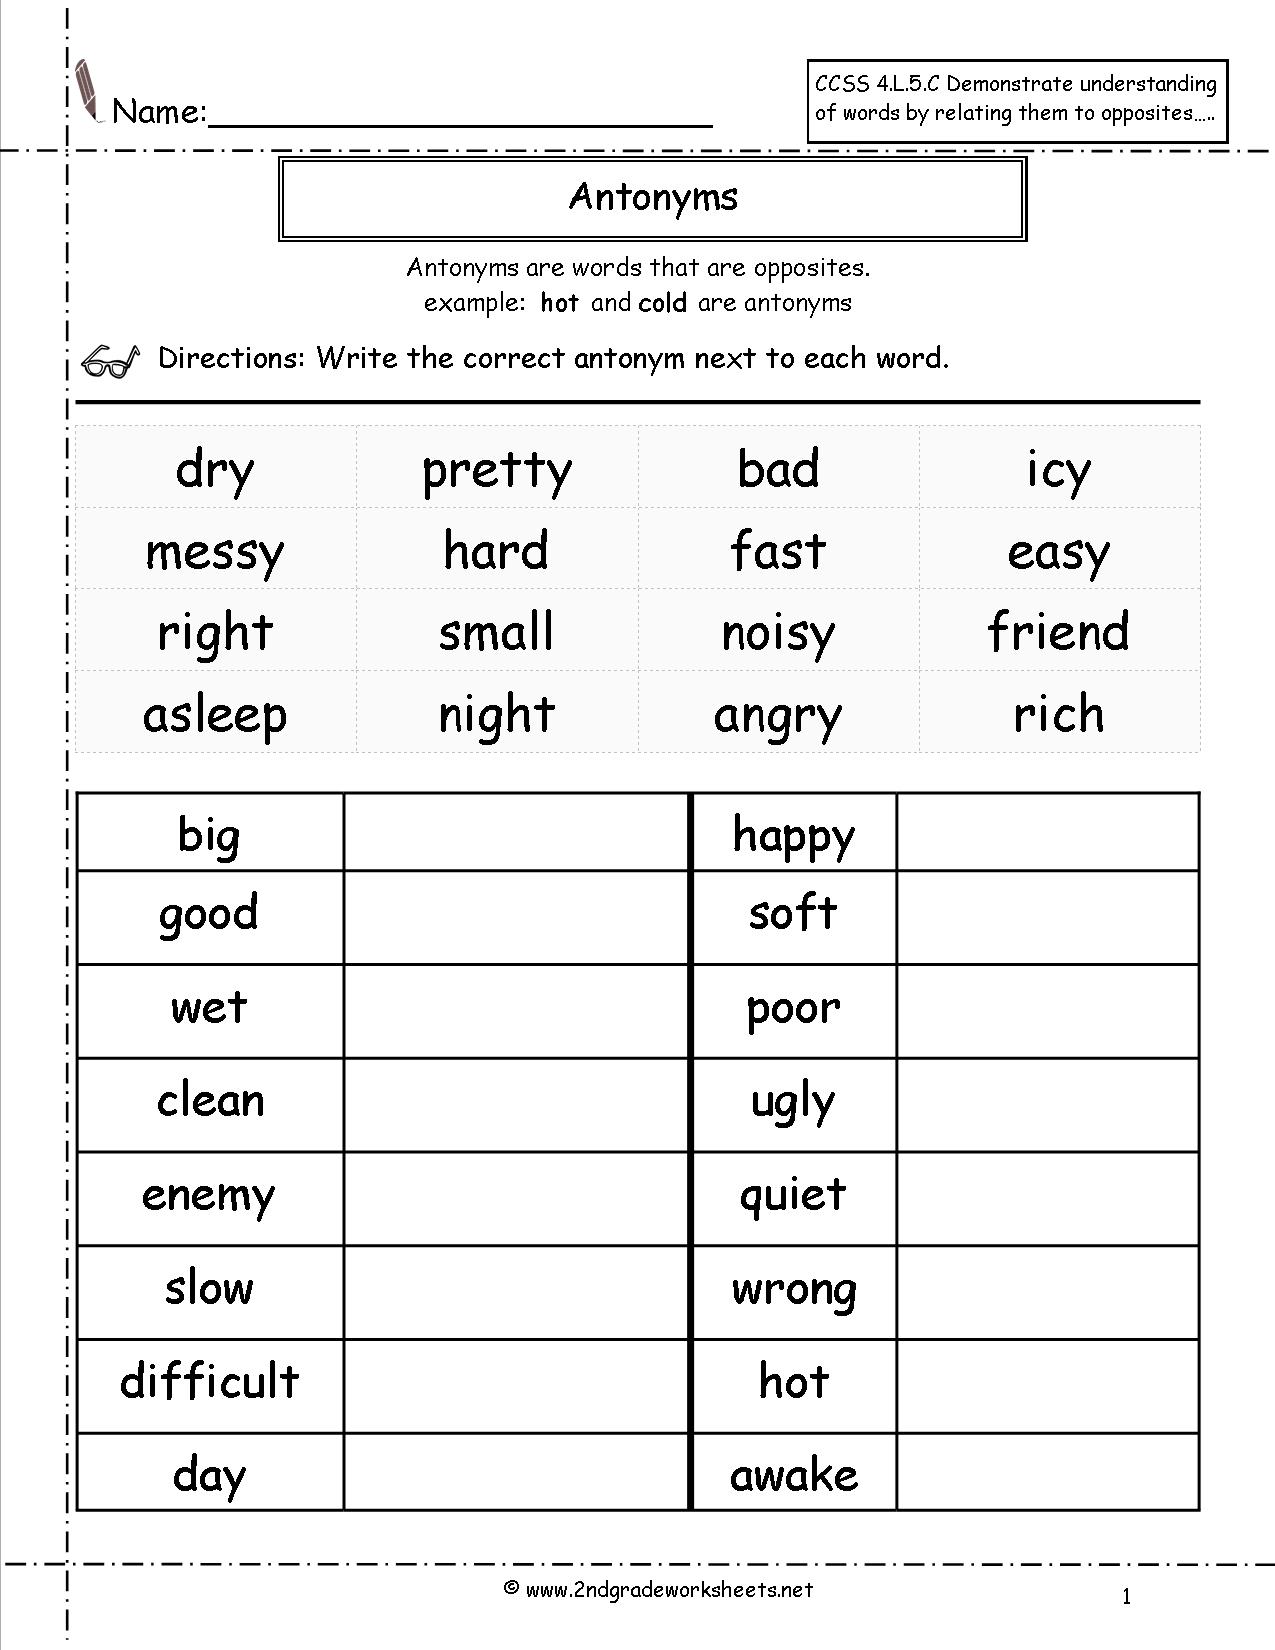 17 Best Images of Nouns Verbs Adjectives Worksheets 1st Grade - Haunted